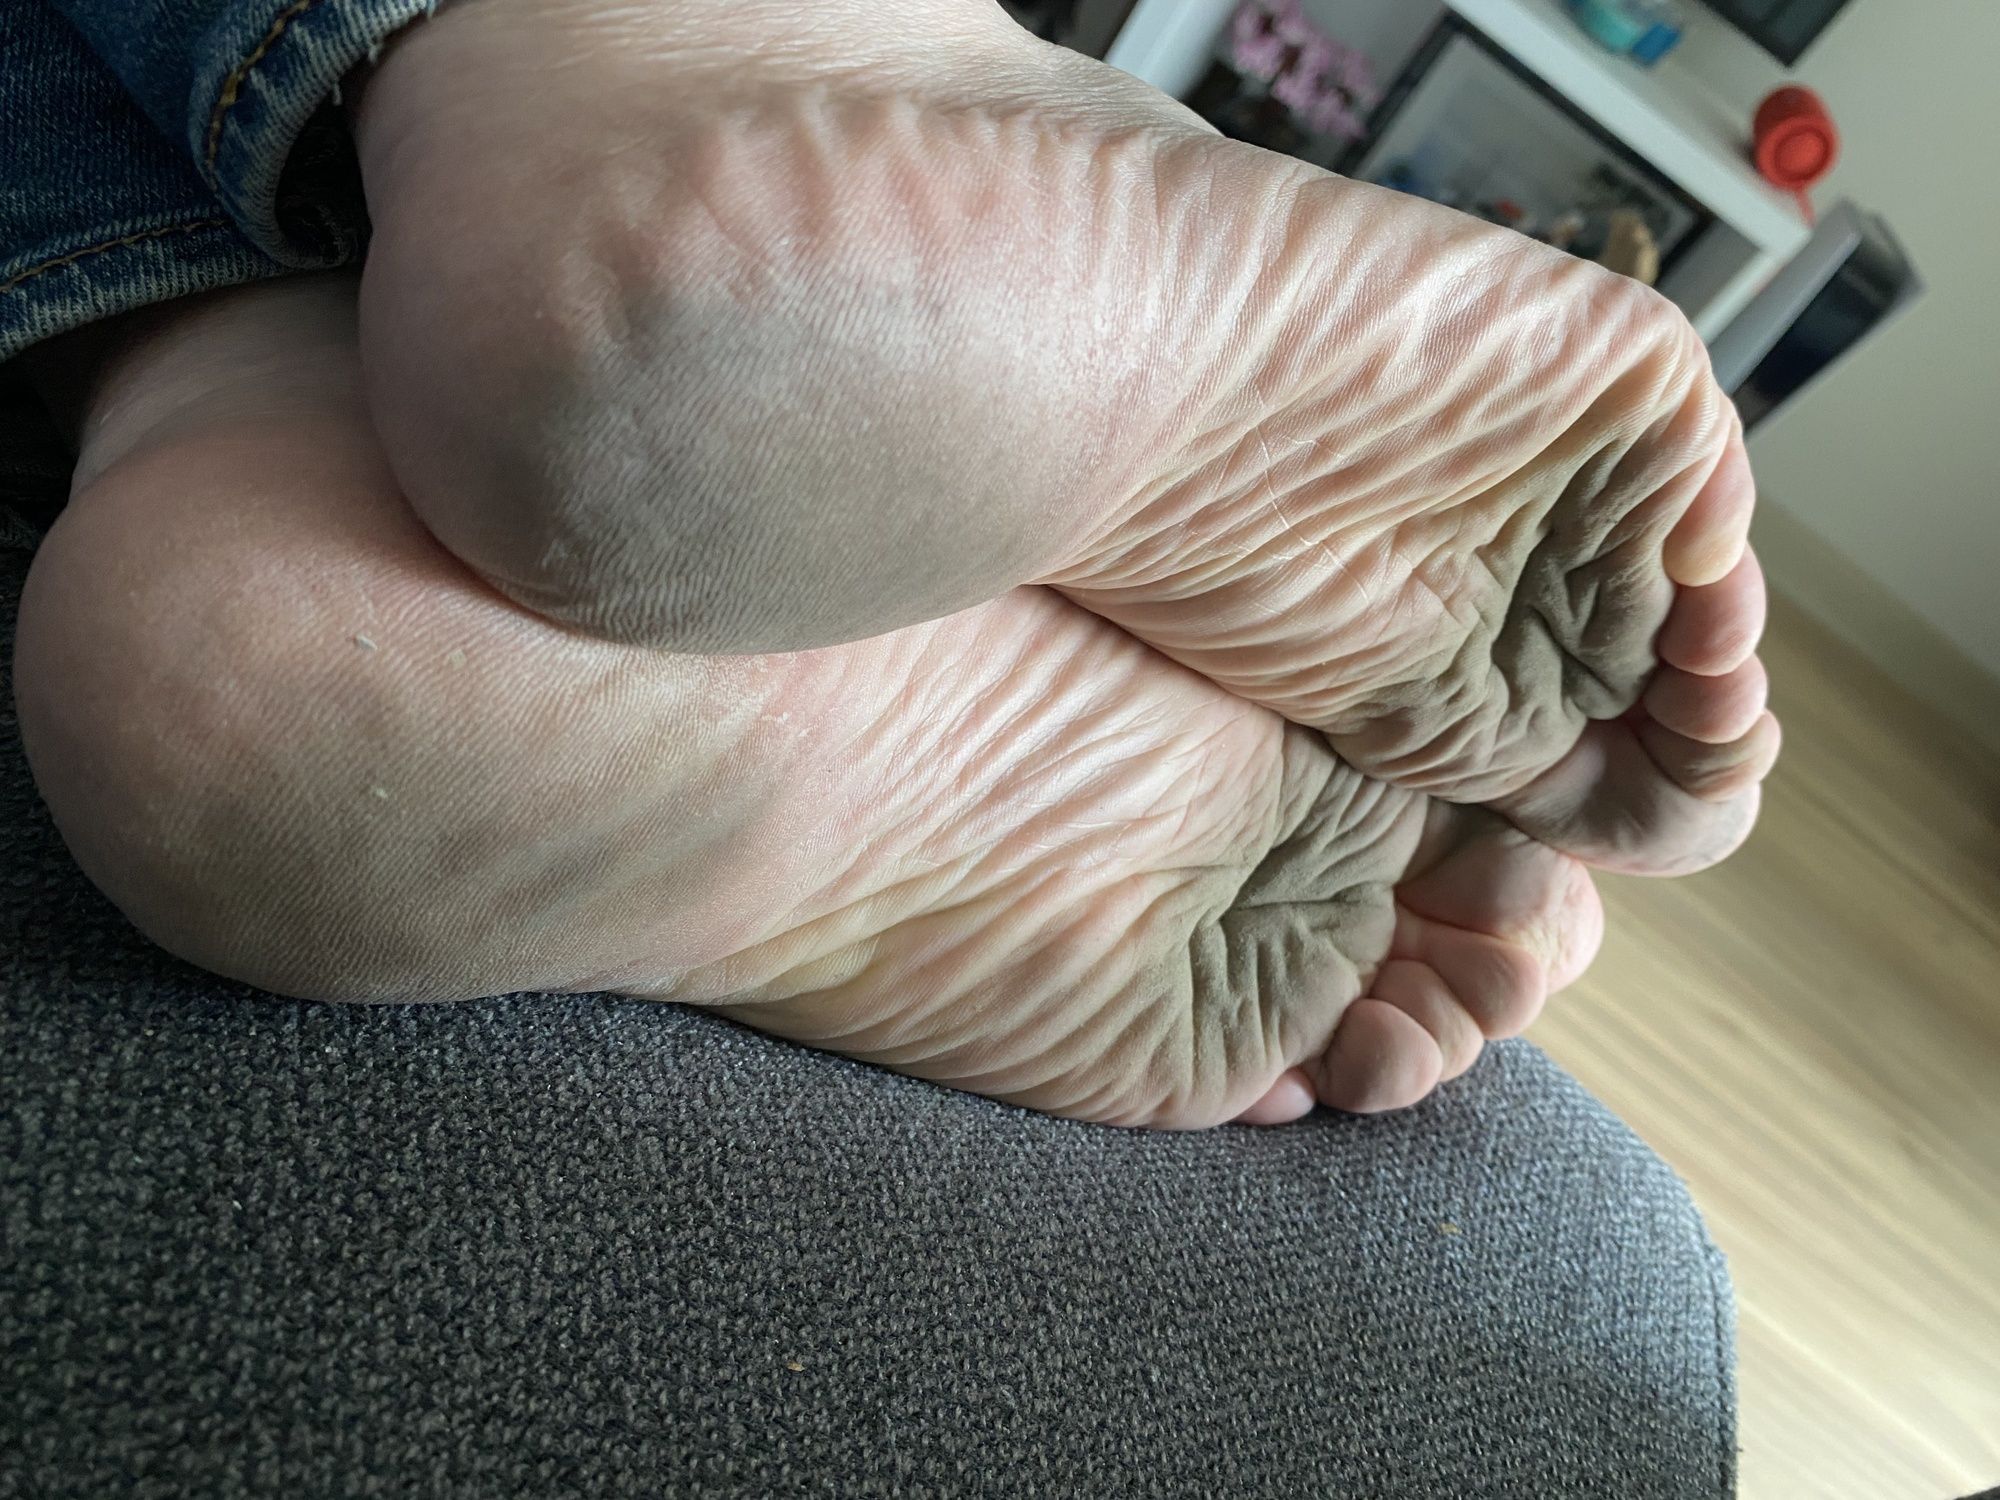 For the love of feet #8